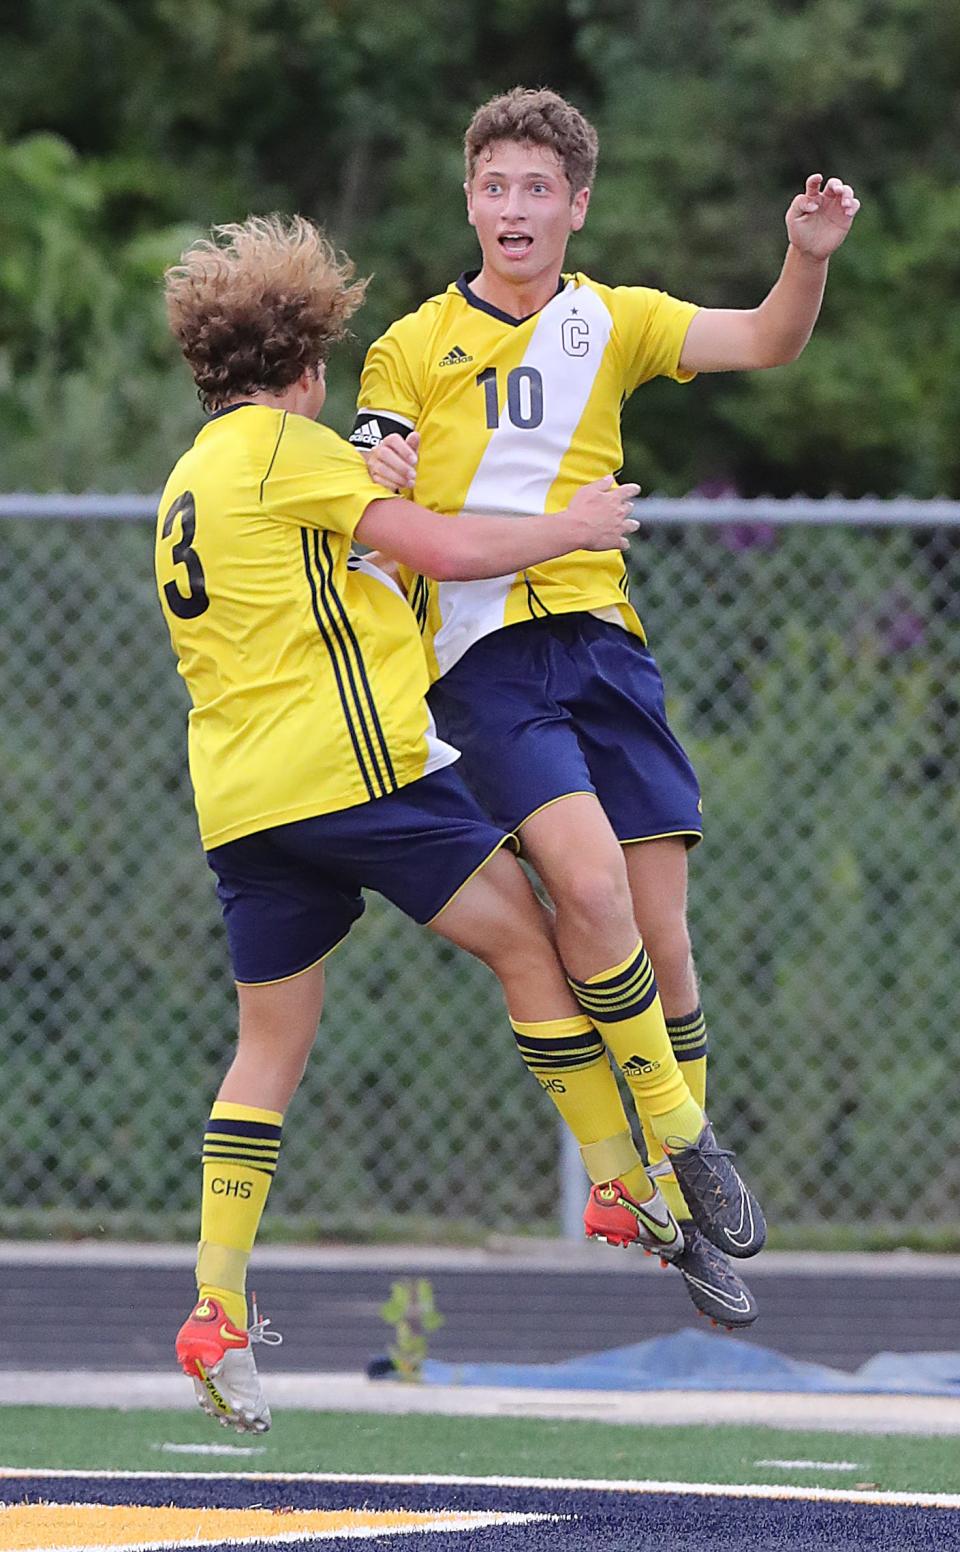 Copley's Colin Link celebrates a first half goal against North Royalton with Calvin Cunat, left, on Thursday, Aug. 25, 2022 in Copley.